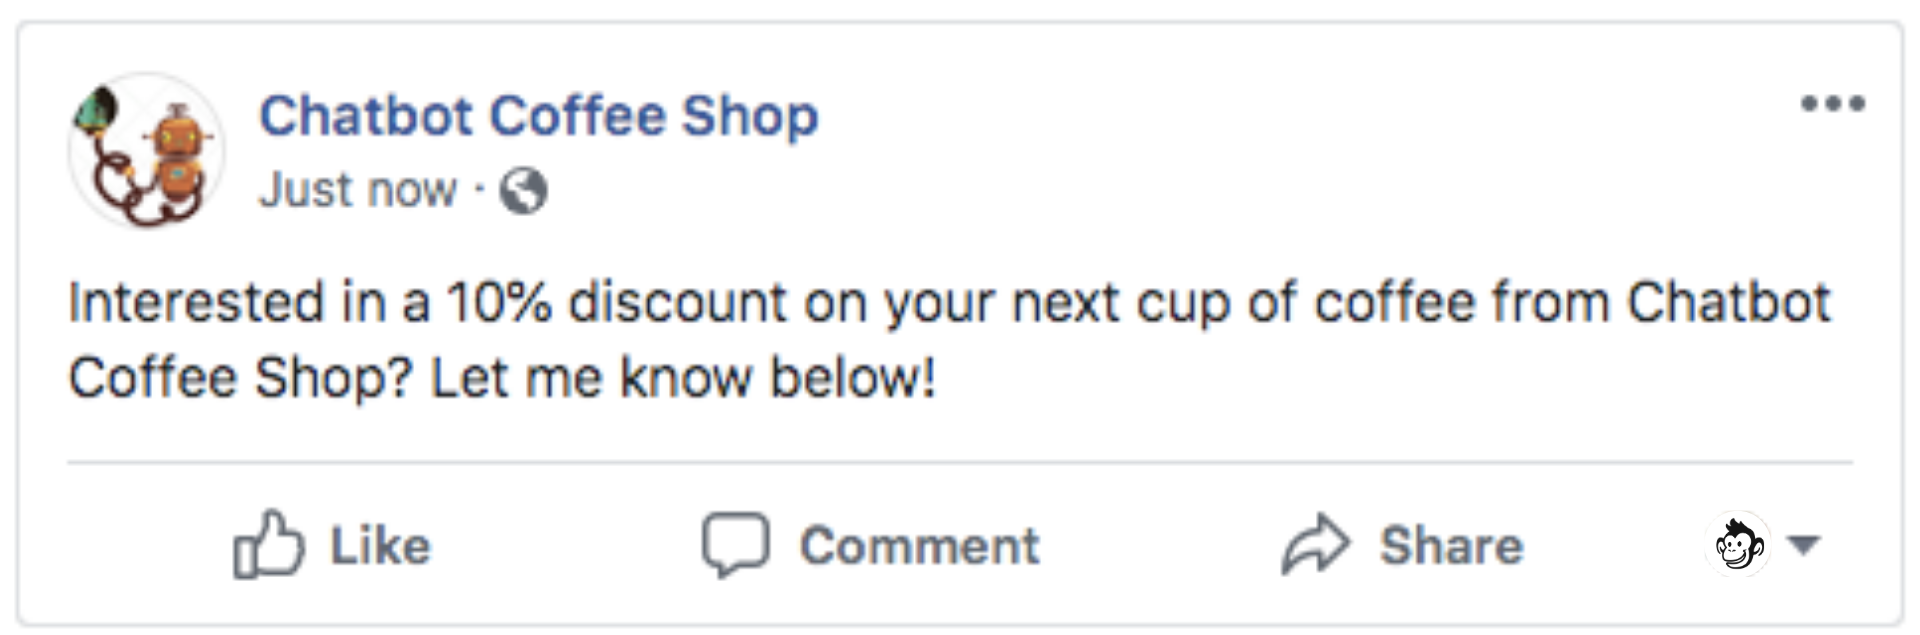 facebook auto responder post telling users to comment if they want a 10% discount from chatbot coffee shop